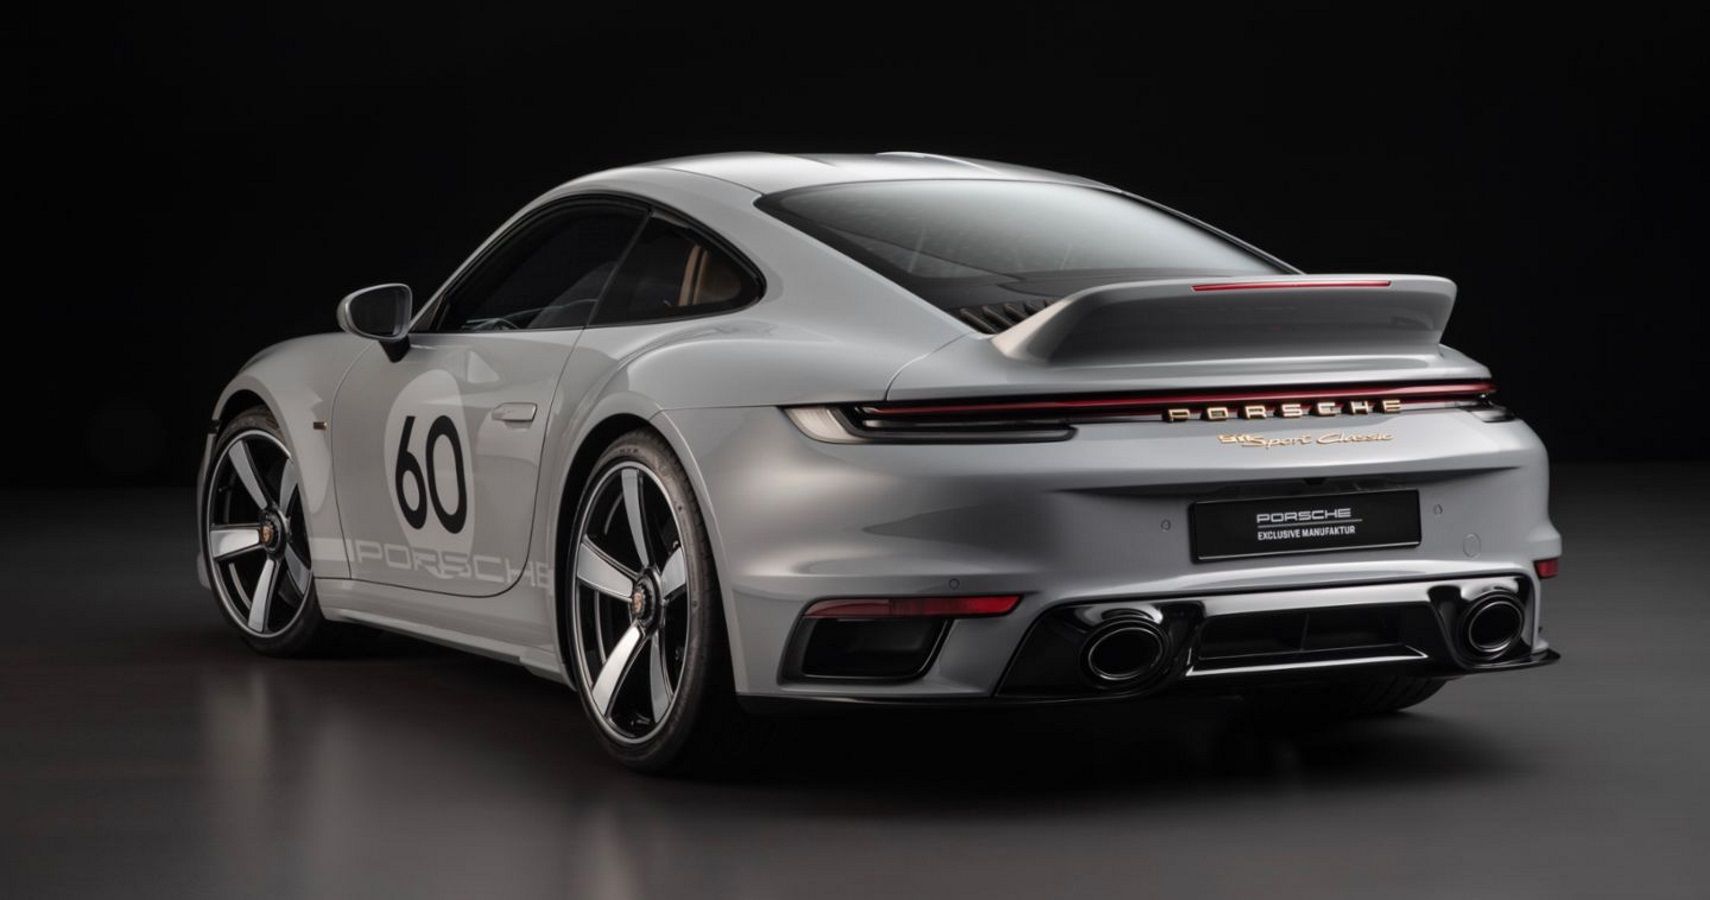 Porsche Limited Edition 911 Sport Classic Debuts With 911 Turbo Engine